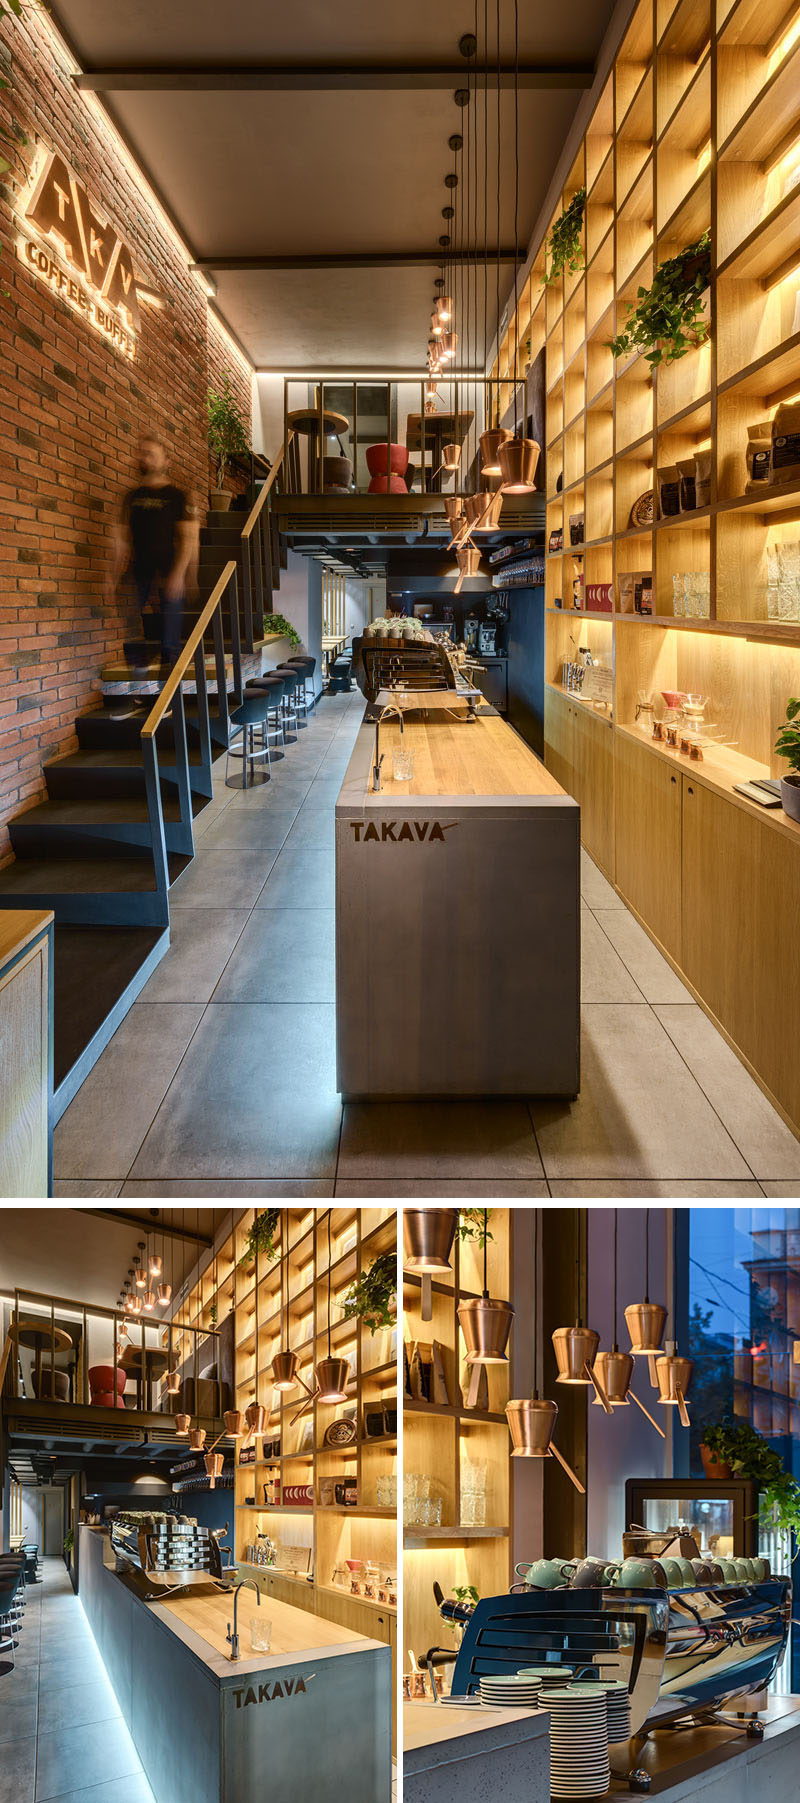 Stepping inside this modern coffee shop, there's a wall of shelving behind the bar that draws the eye upward to show off the height of the space. A long concrete and wood bar has custom pendant lights made from coffee pots. #ModernCoffeeShop #ModernCafe